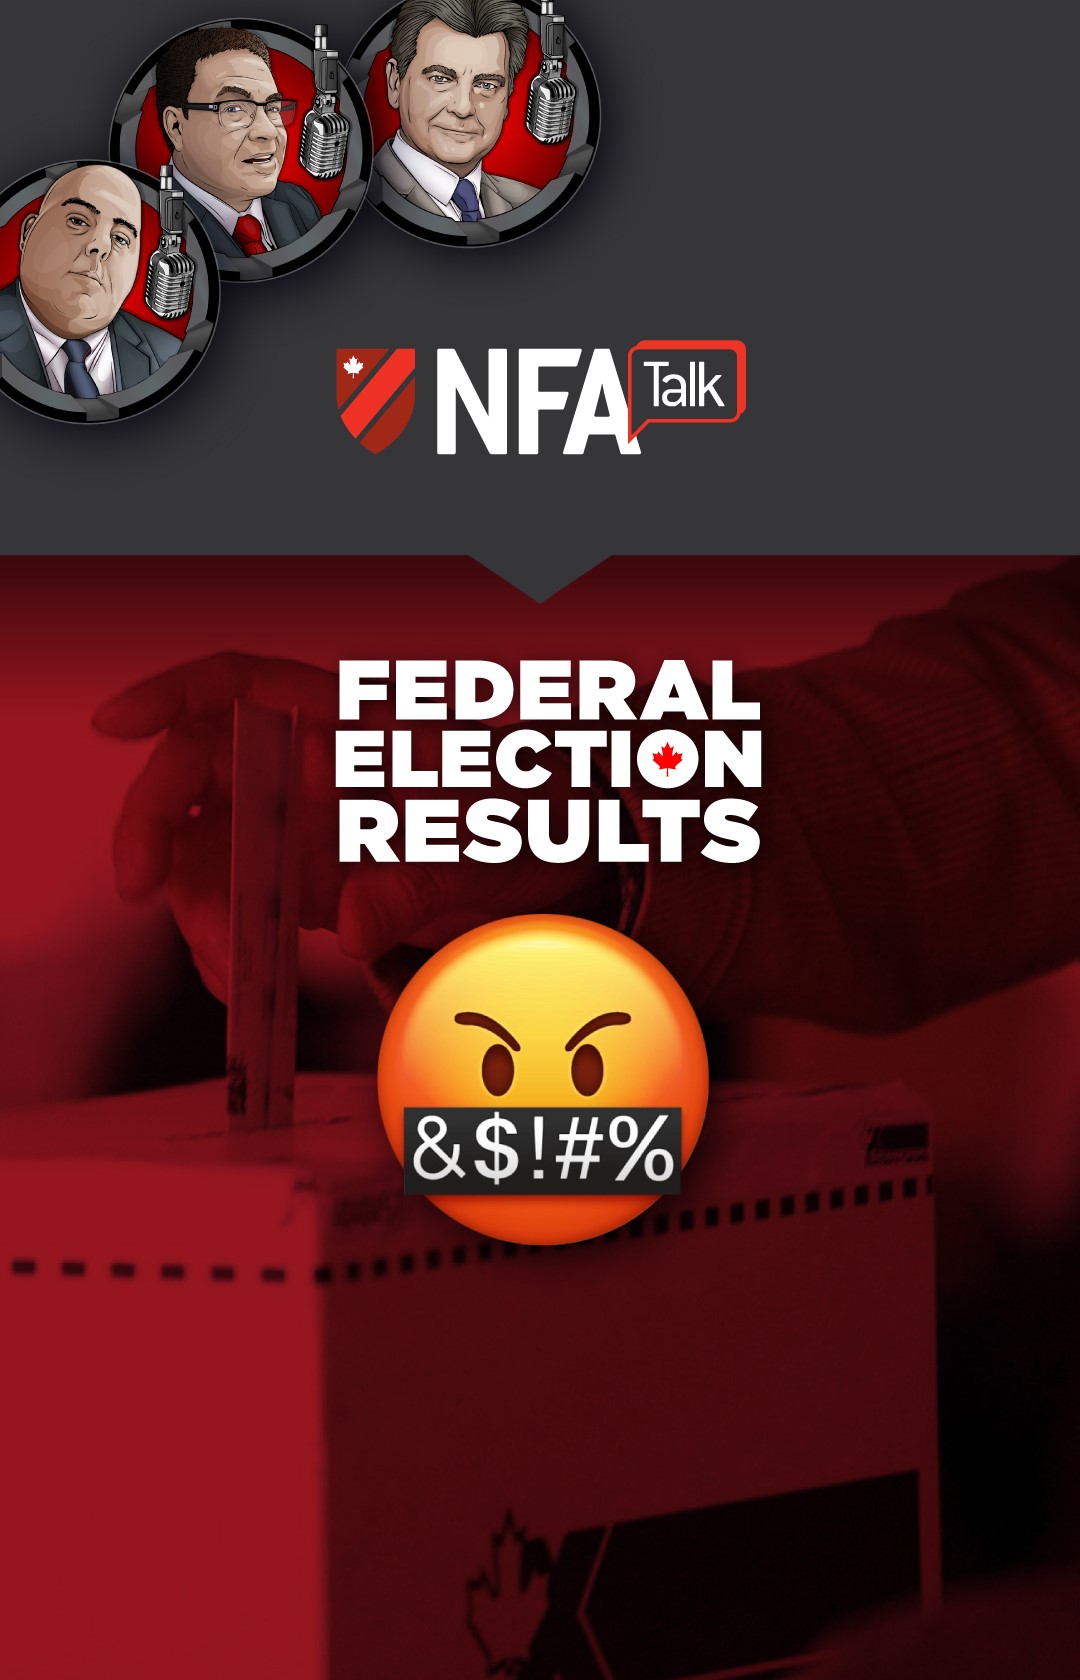 NFA Talk S2E17 - Federal Election Results